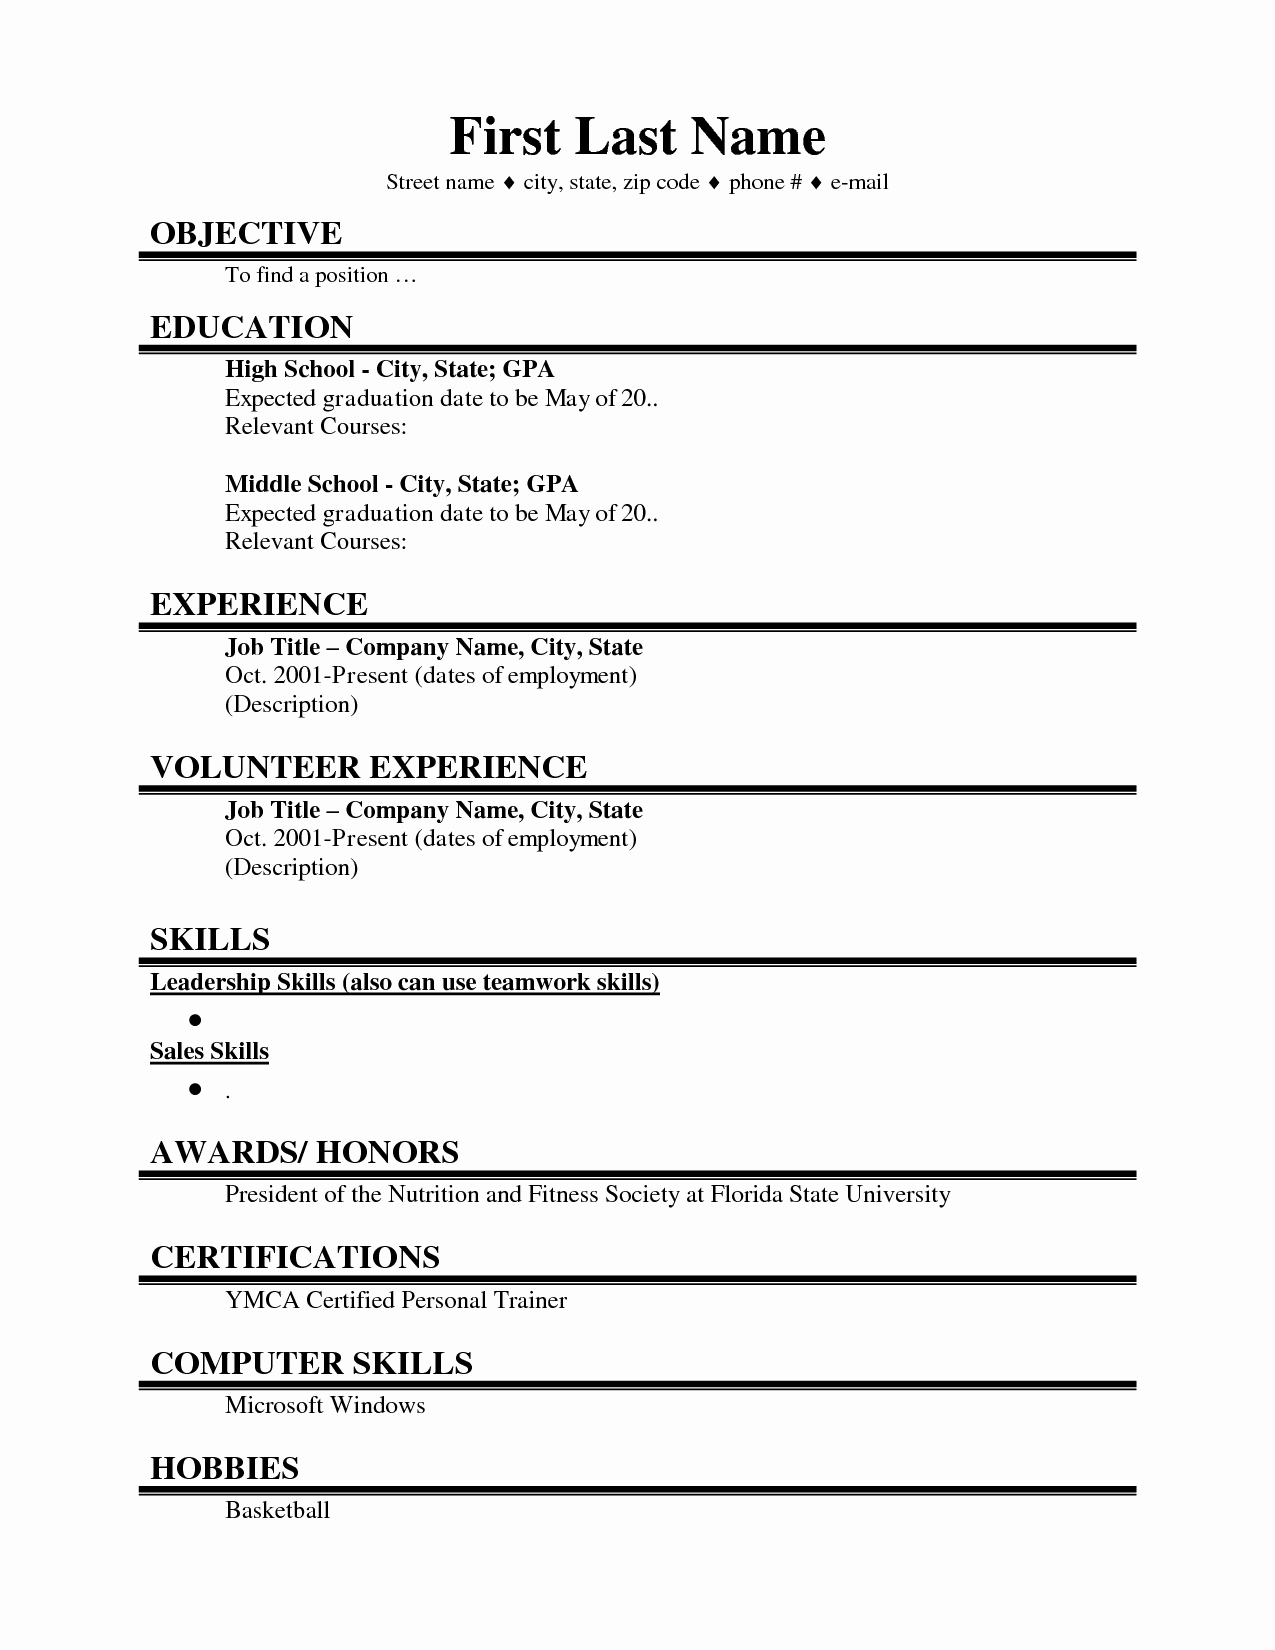 Resume Examples for College Students Unique attractive Design 